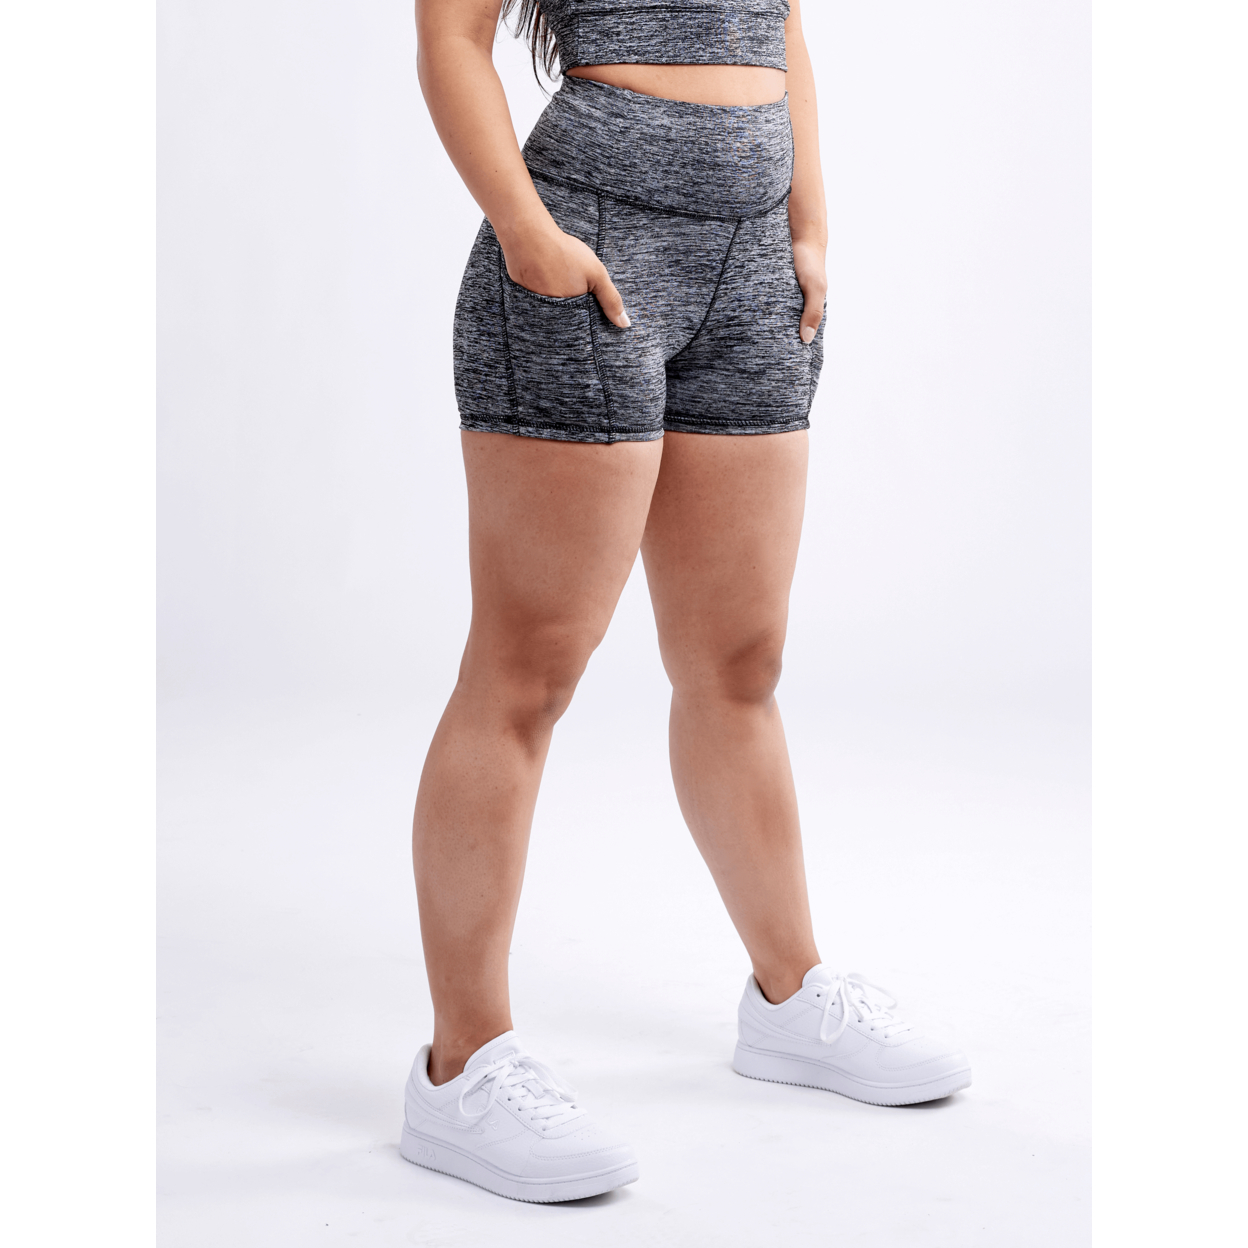 High-Waisted Athletic Shorts With Side Pockets - Grey, Small / Medium